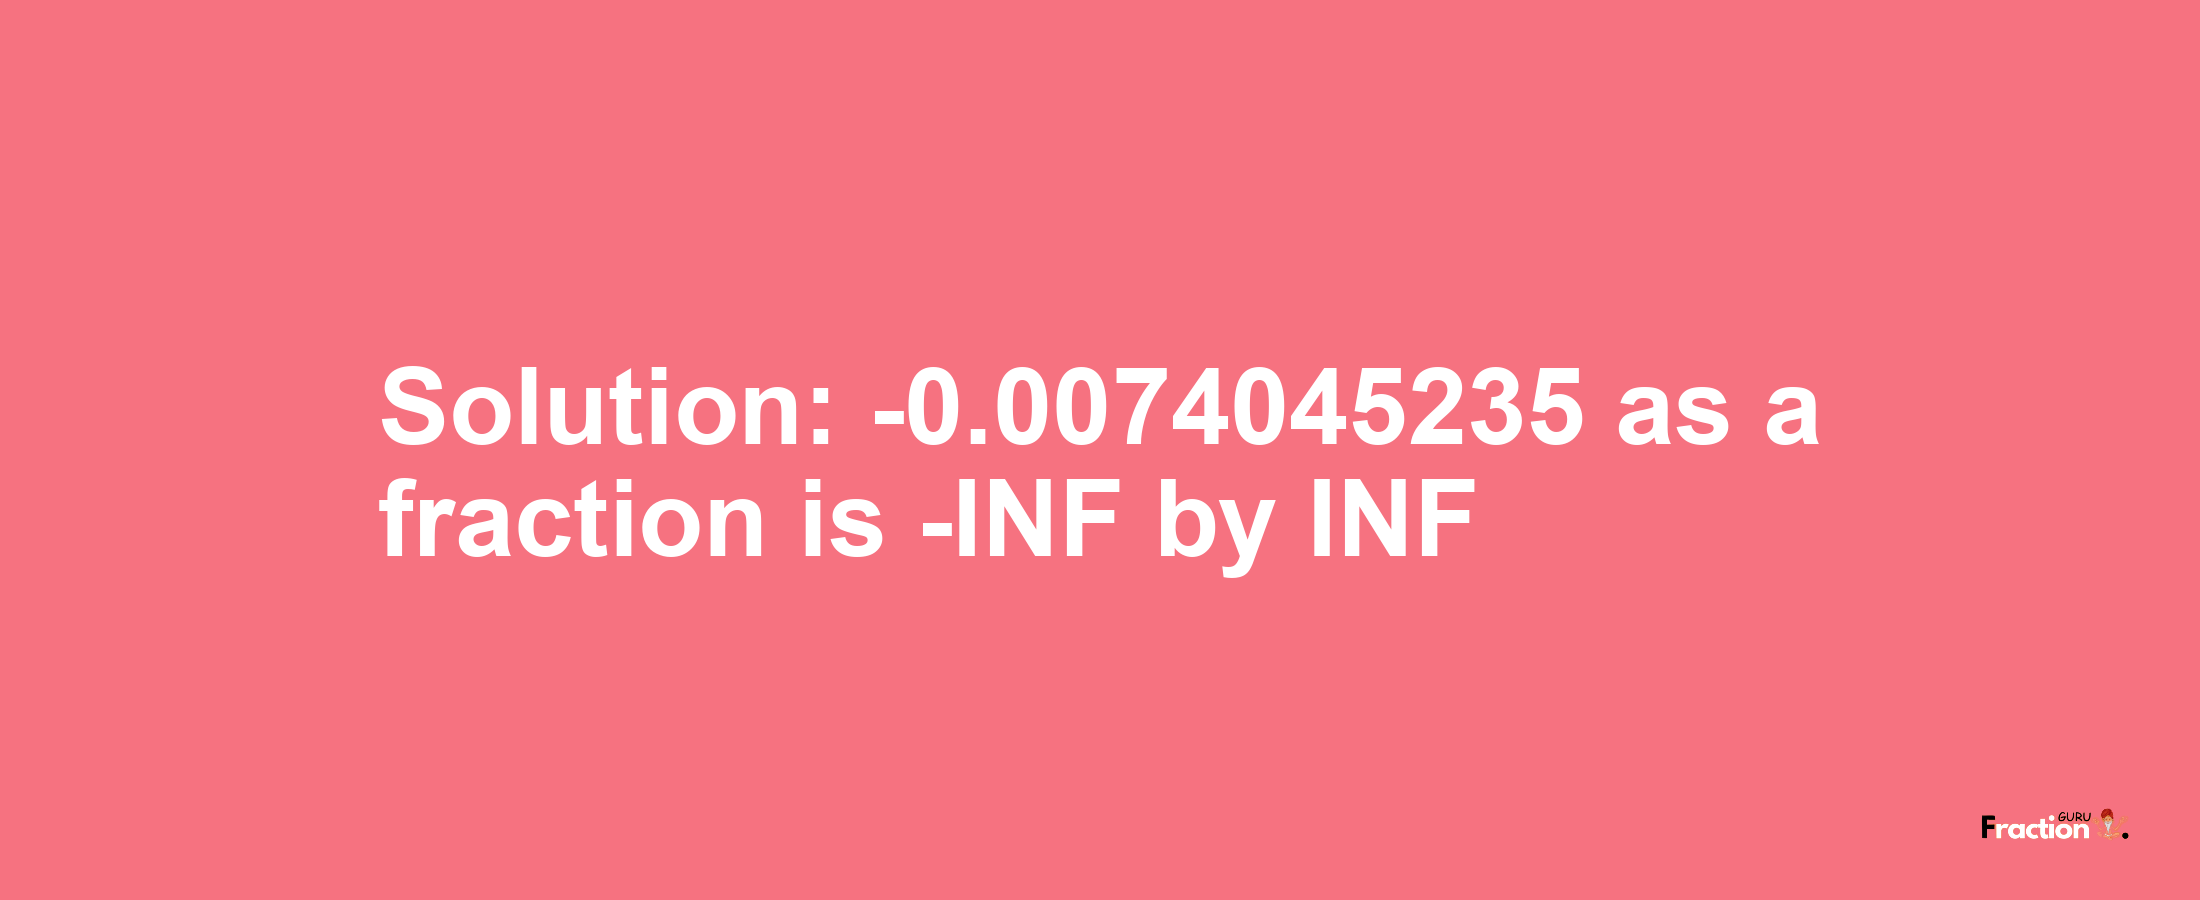 Solution:-0.0074045235 as a fraction is -INF/INF